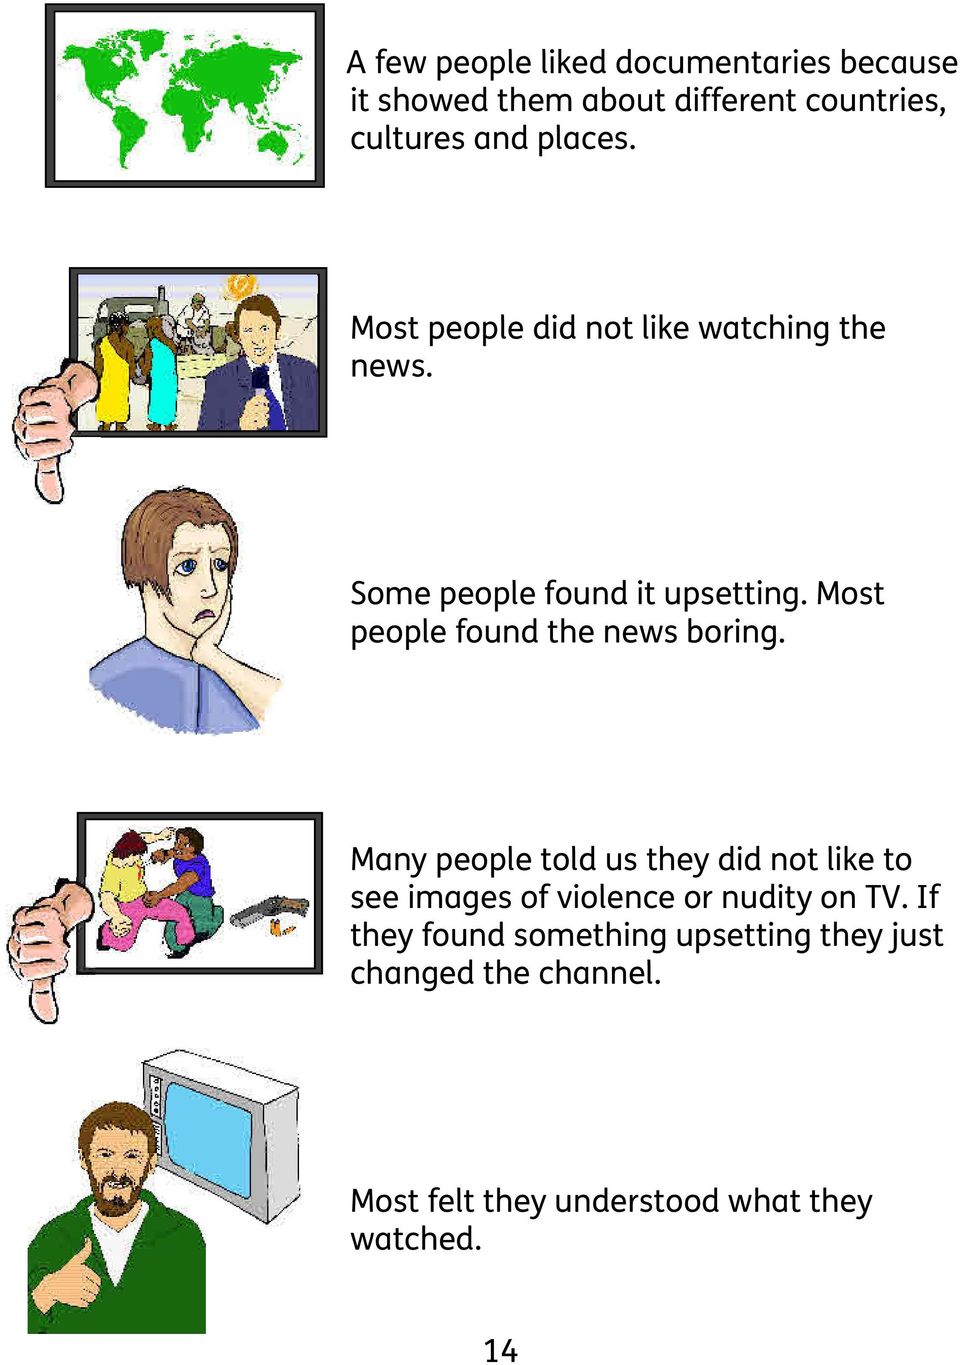 Most people found the news boring.